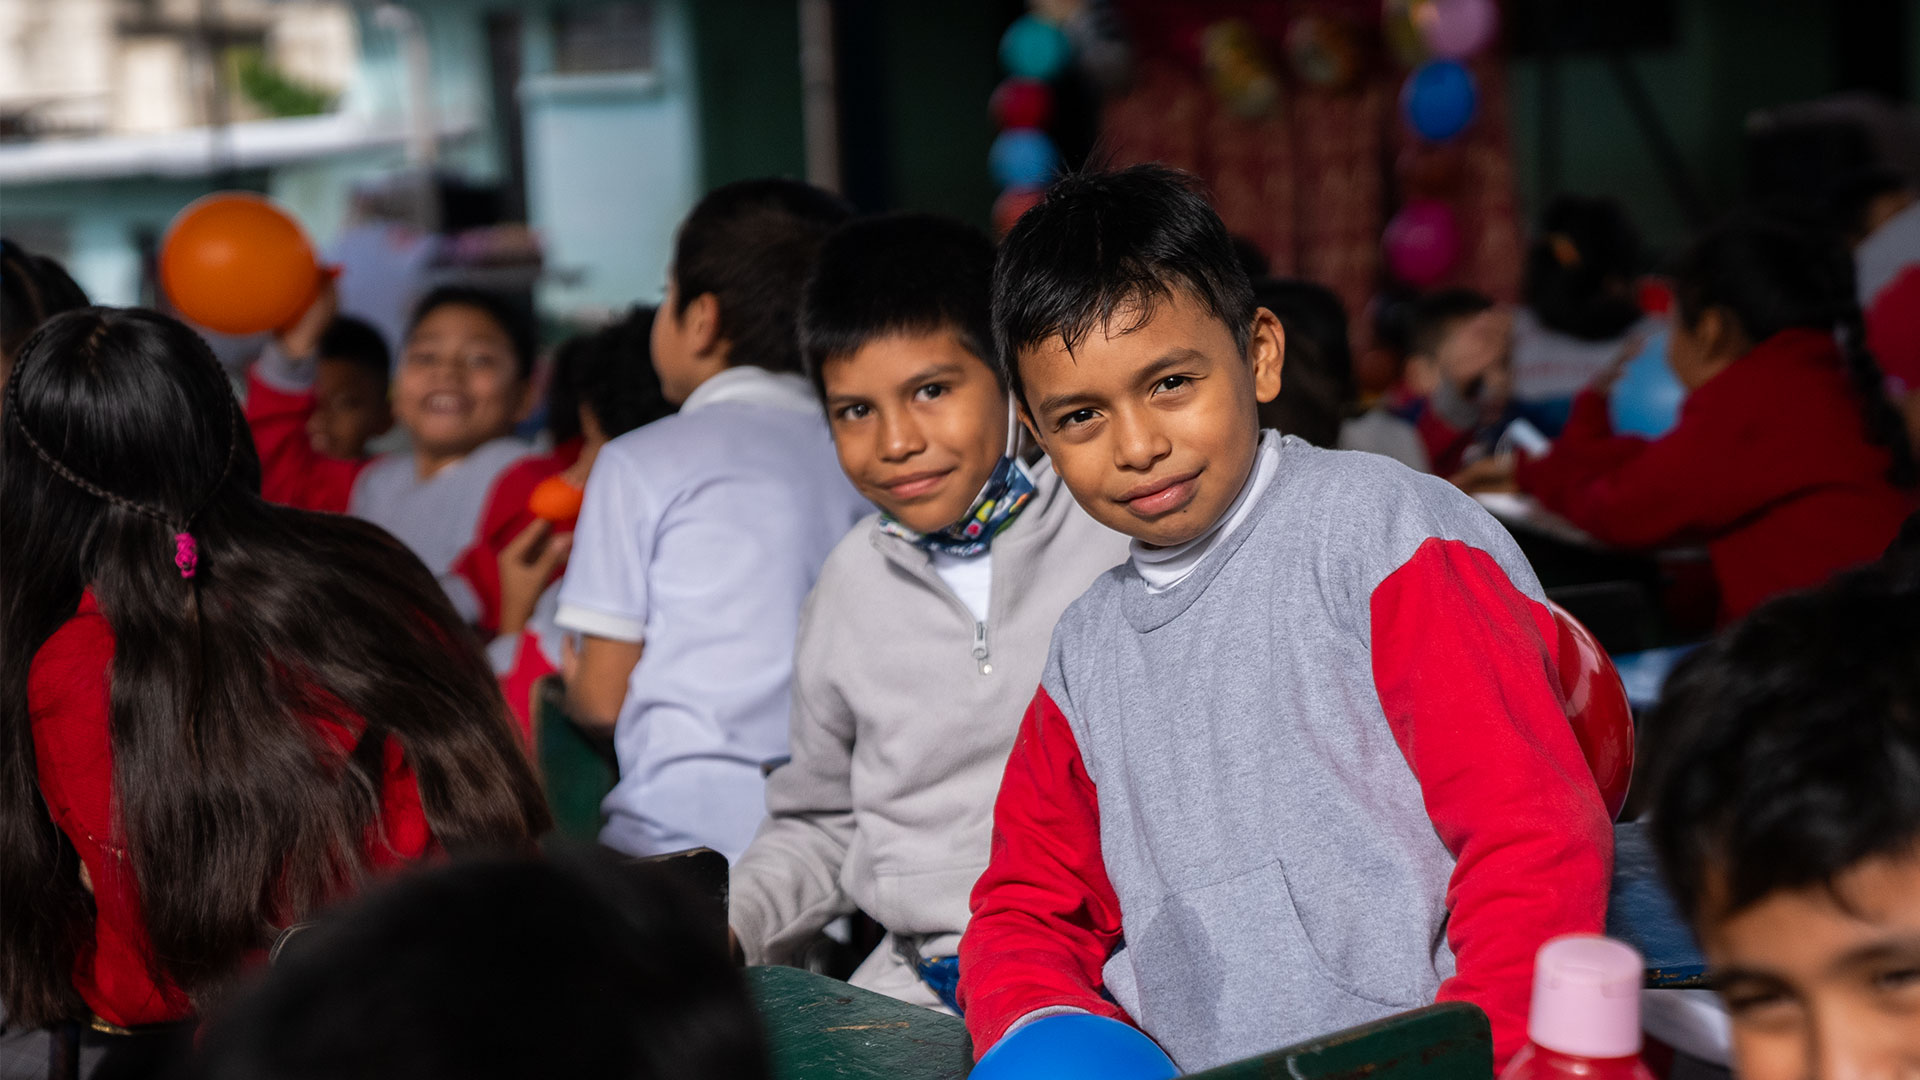 The journalist Catherine Pepinster went to Guatemala to see the impact of your support for һƷ̳̽mission as children embrace an alternative to the gang culture around them.